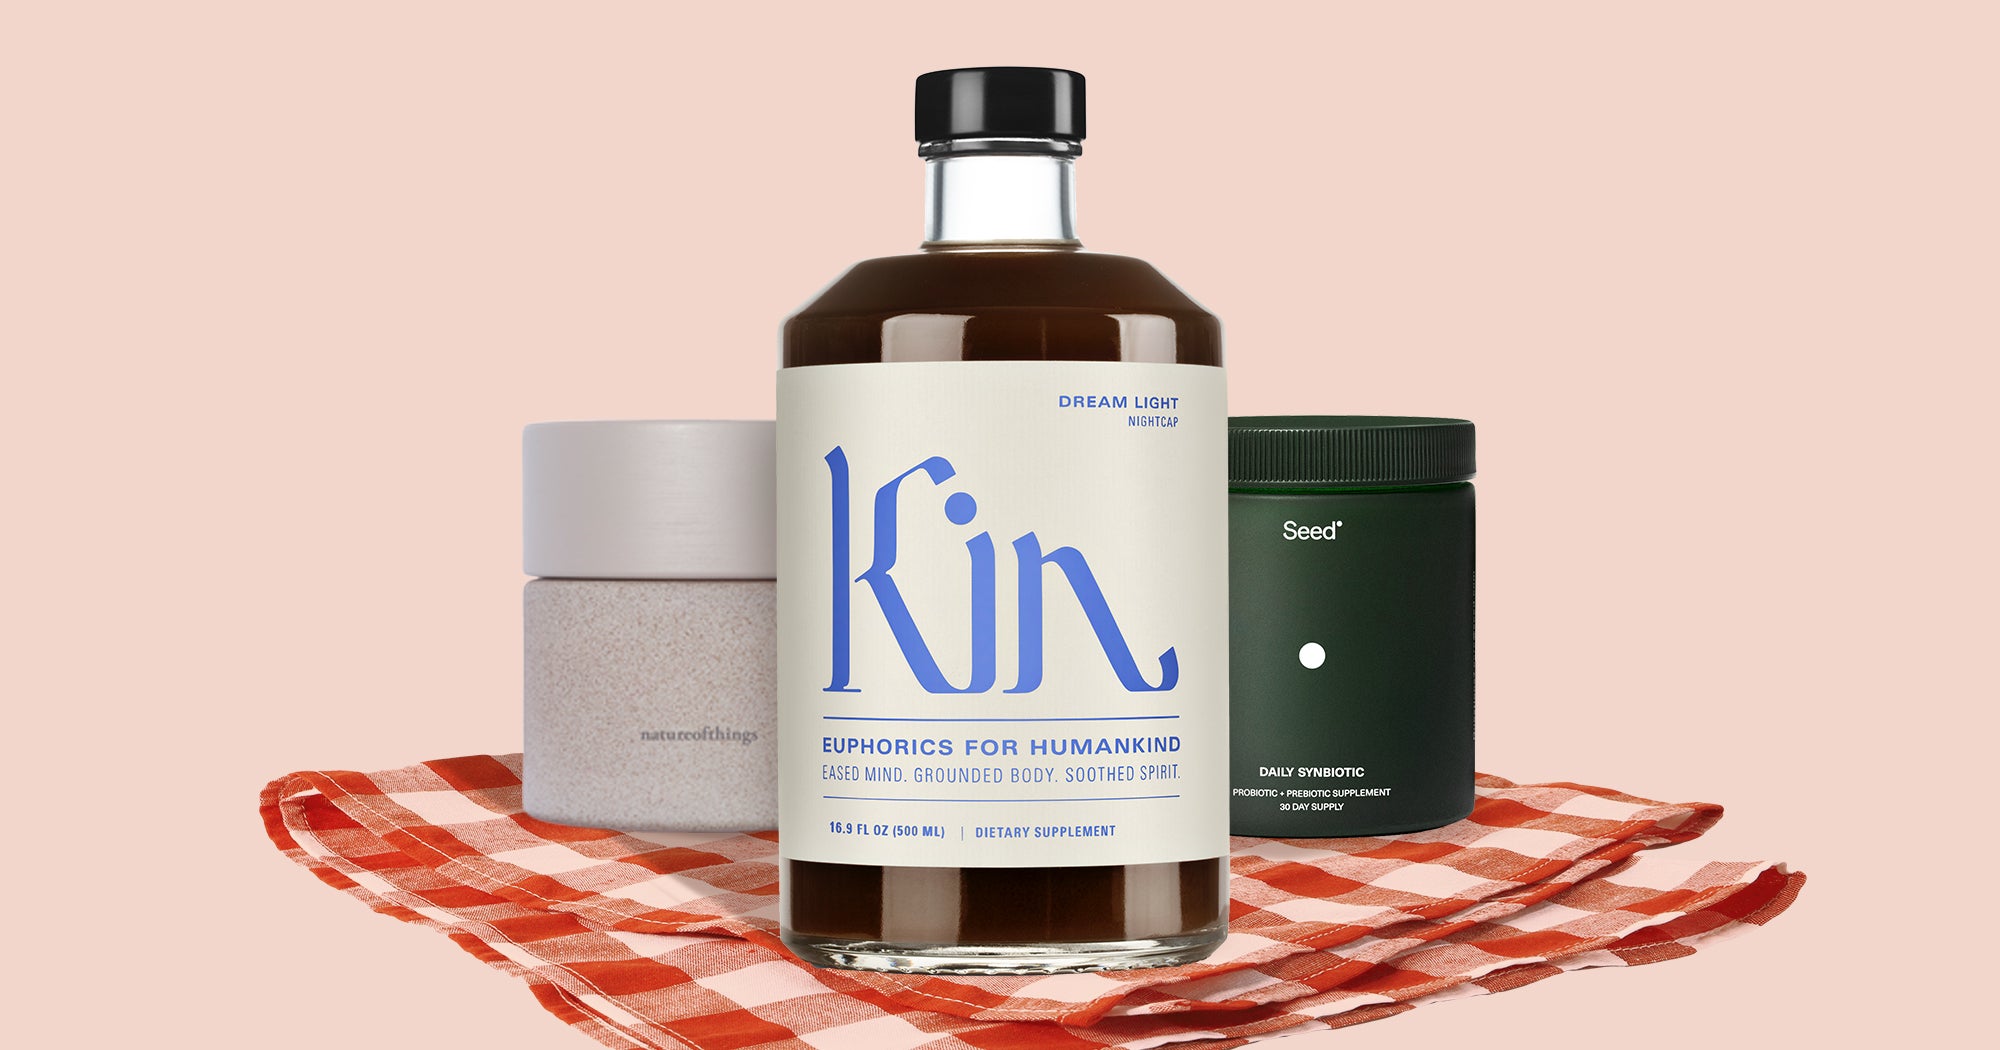 Sample wellbeing products